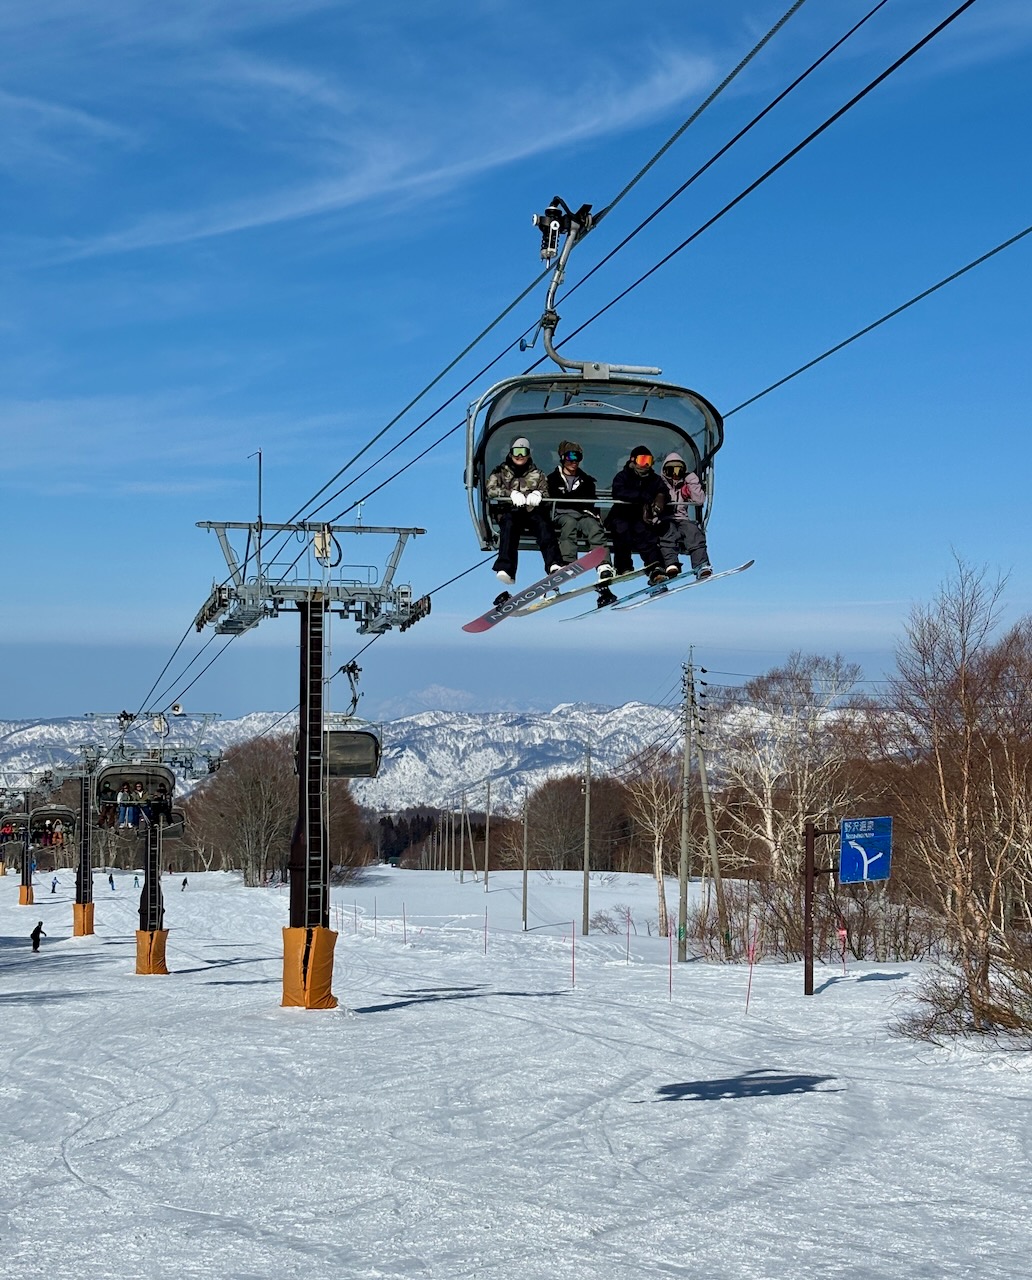 Nozawa Onsen bathing in the sunshine in the last couple of days with many people enjoying their winter holidays on the slopes